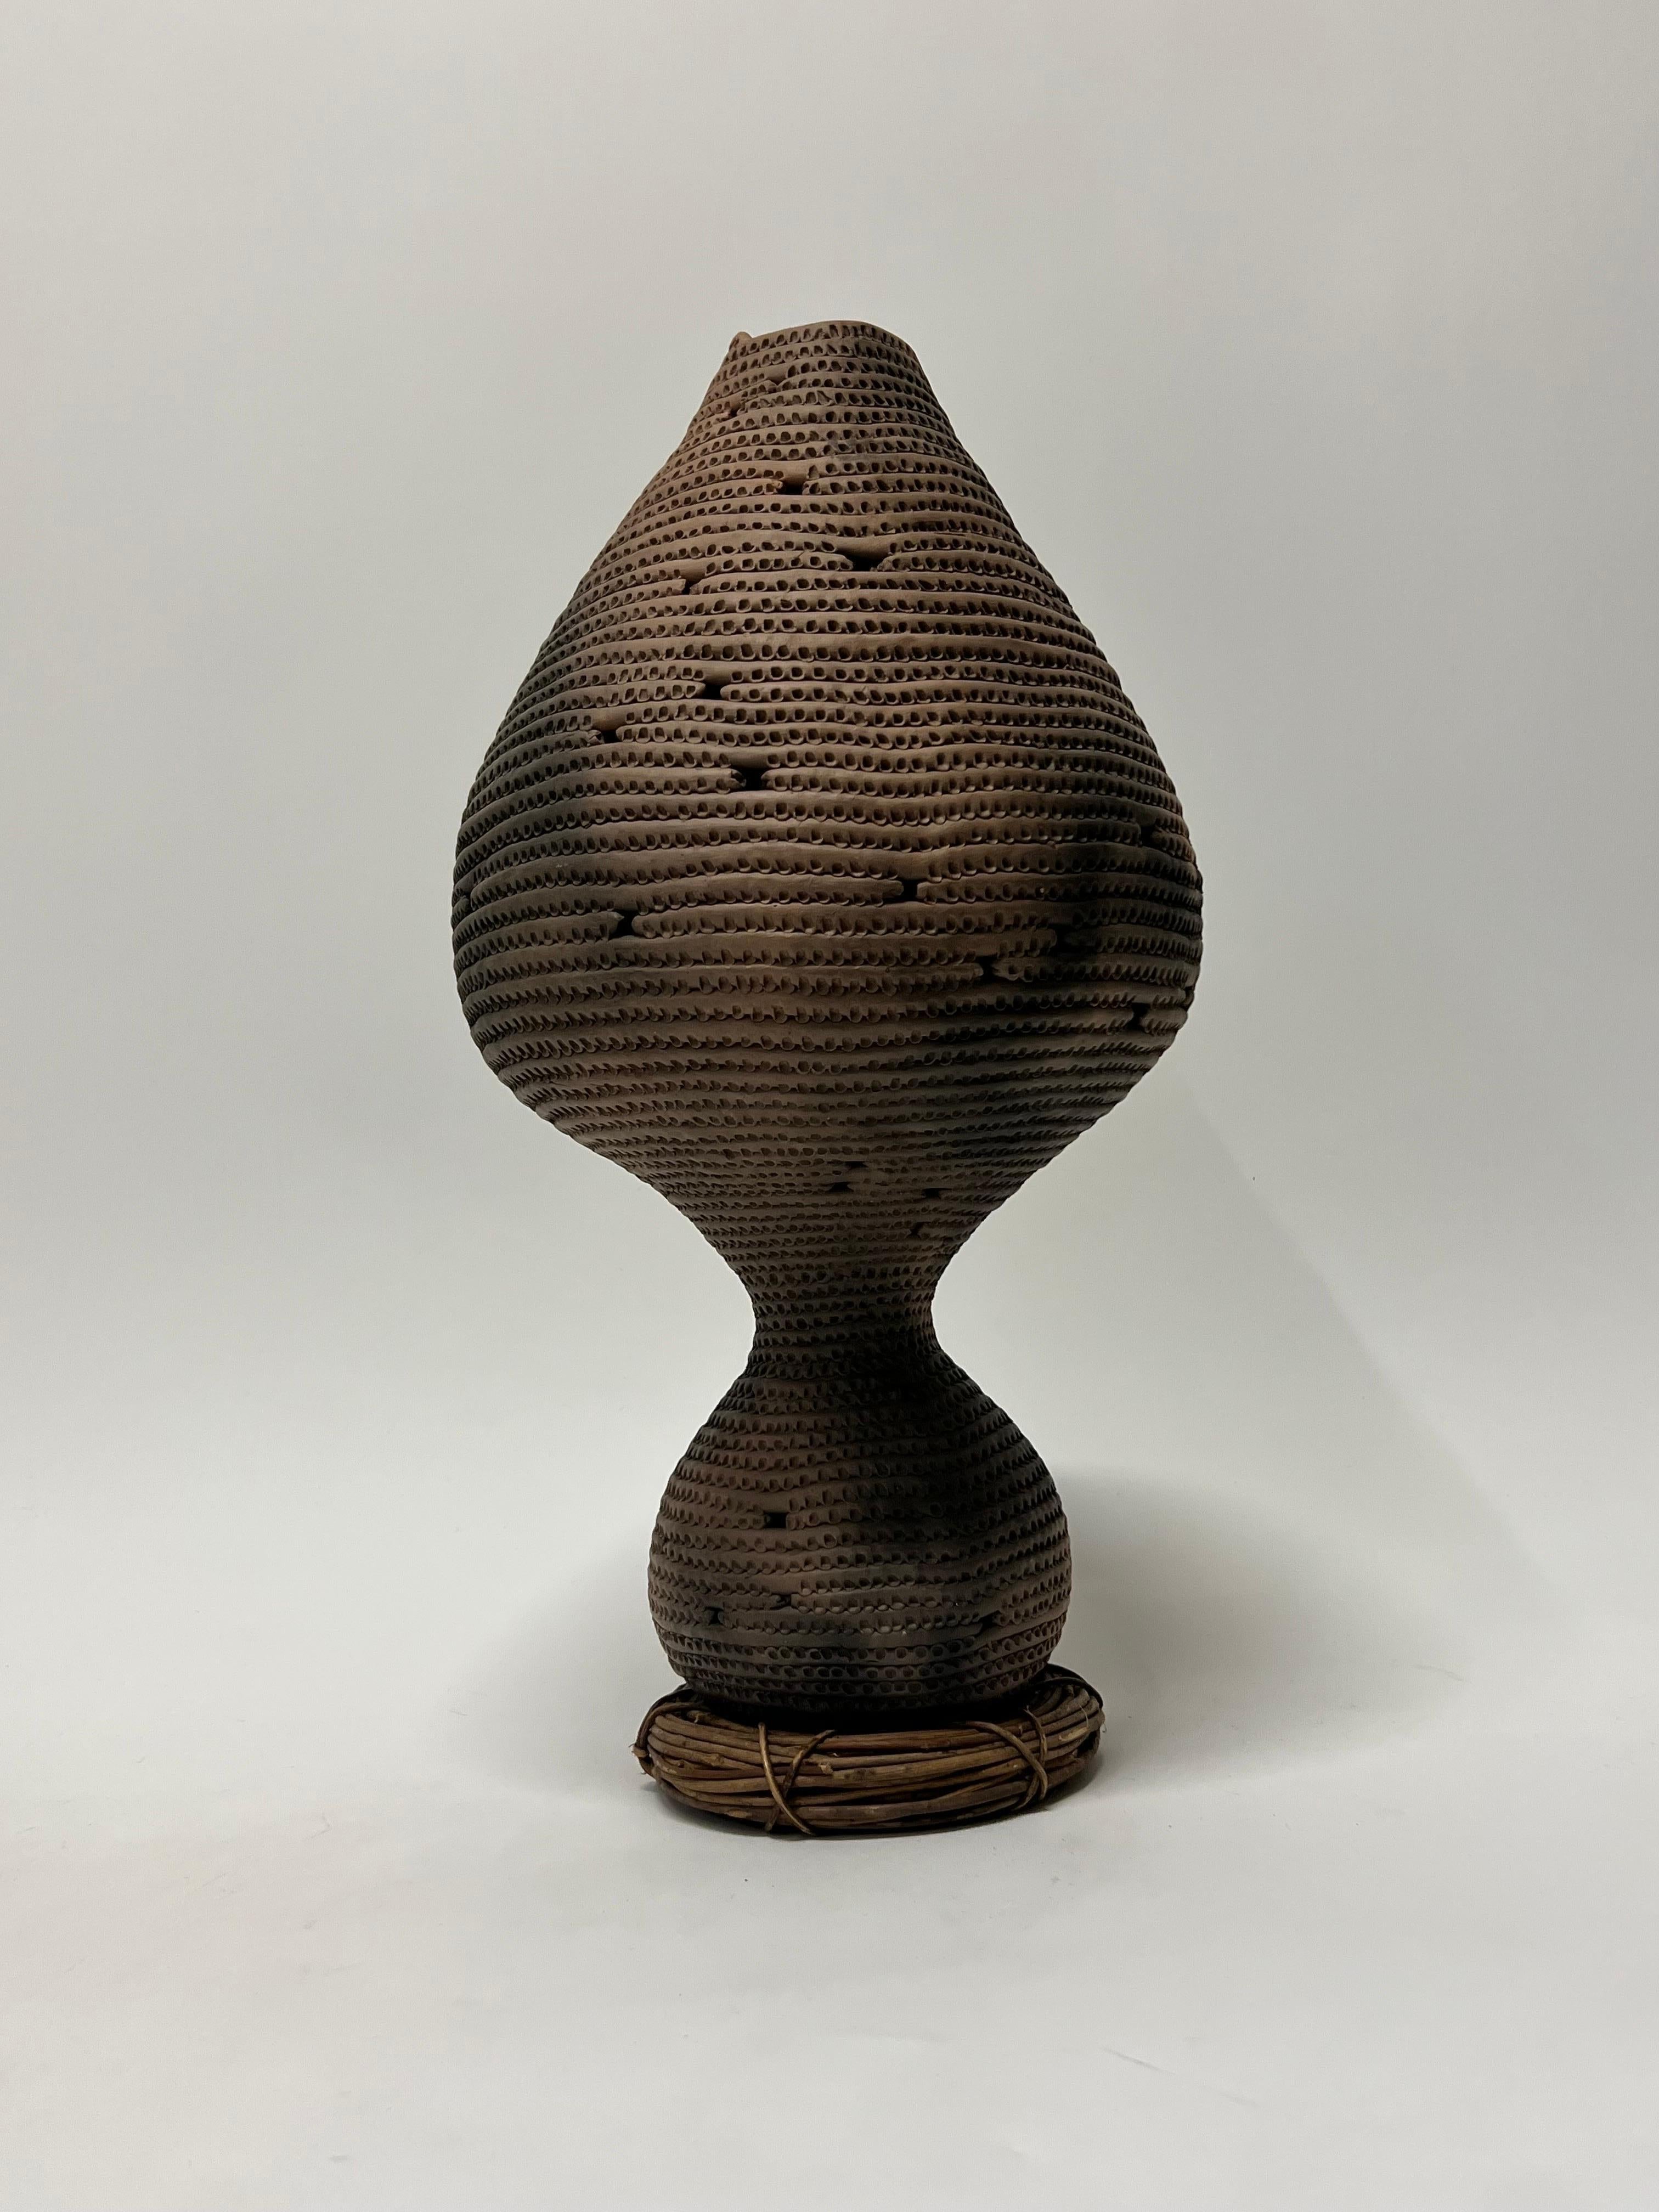 Carla Malone Ceramic Sculpture Vessel c1980s. Malone (1954-1996) lived most of her life in Stockton, California. Her vessels pay homage to those of ancient cultures. They are allegorical contemporary forms that attempt to recapture a human element